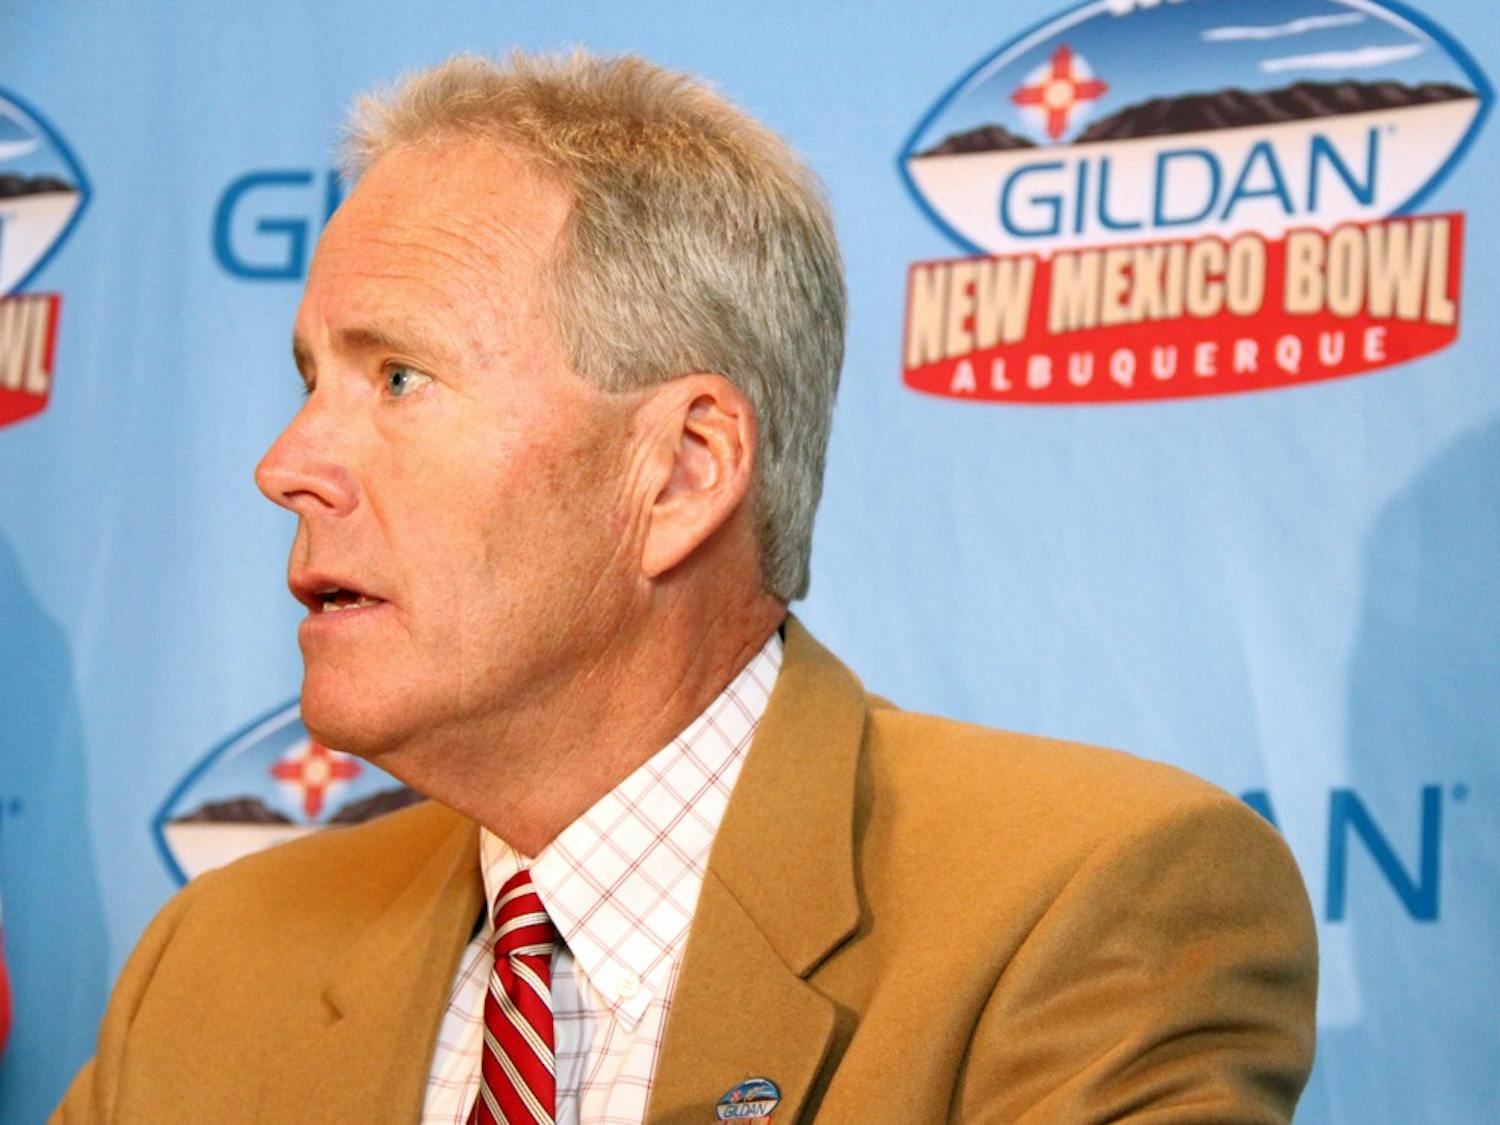 New Mexico head coach Bob Davie talks to the media at the Gildan New Mexico Bowl luncheon on Wednesday. The Lobos will face Arizona for the first time since 2008.&nbsp;